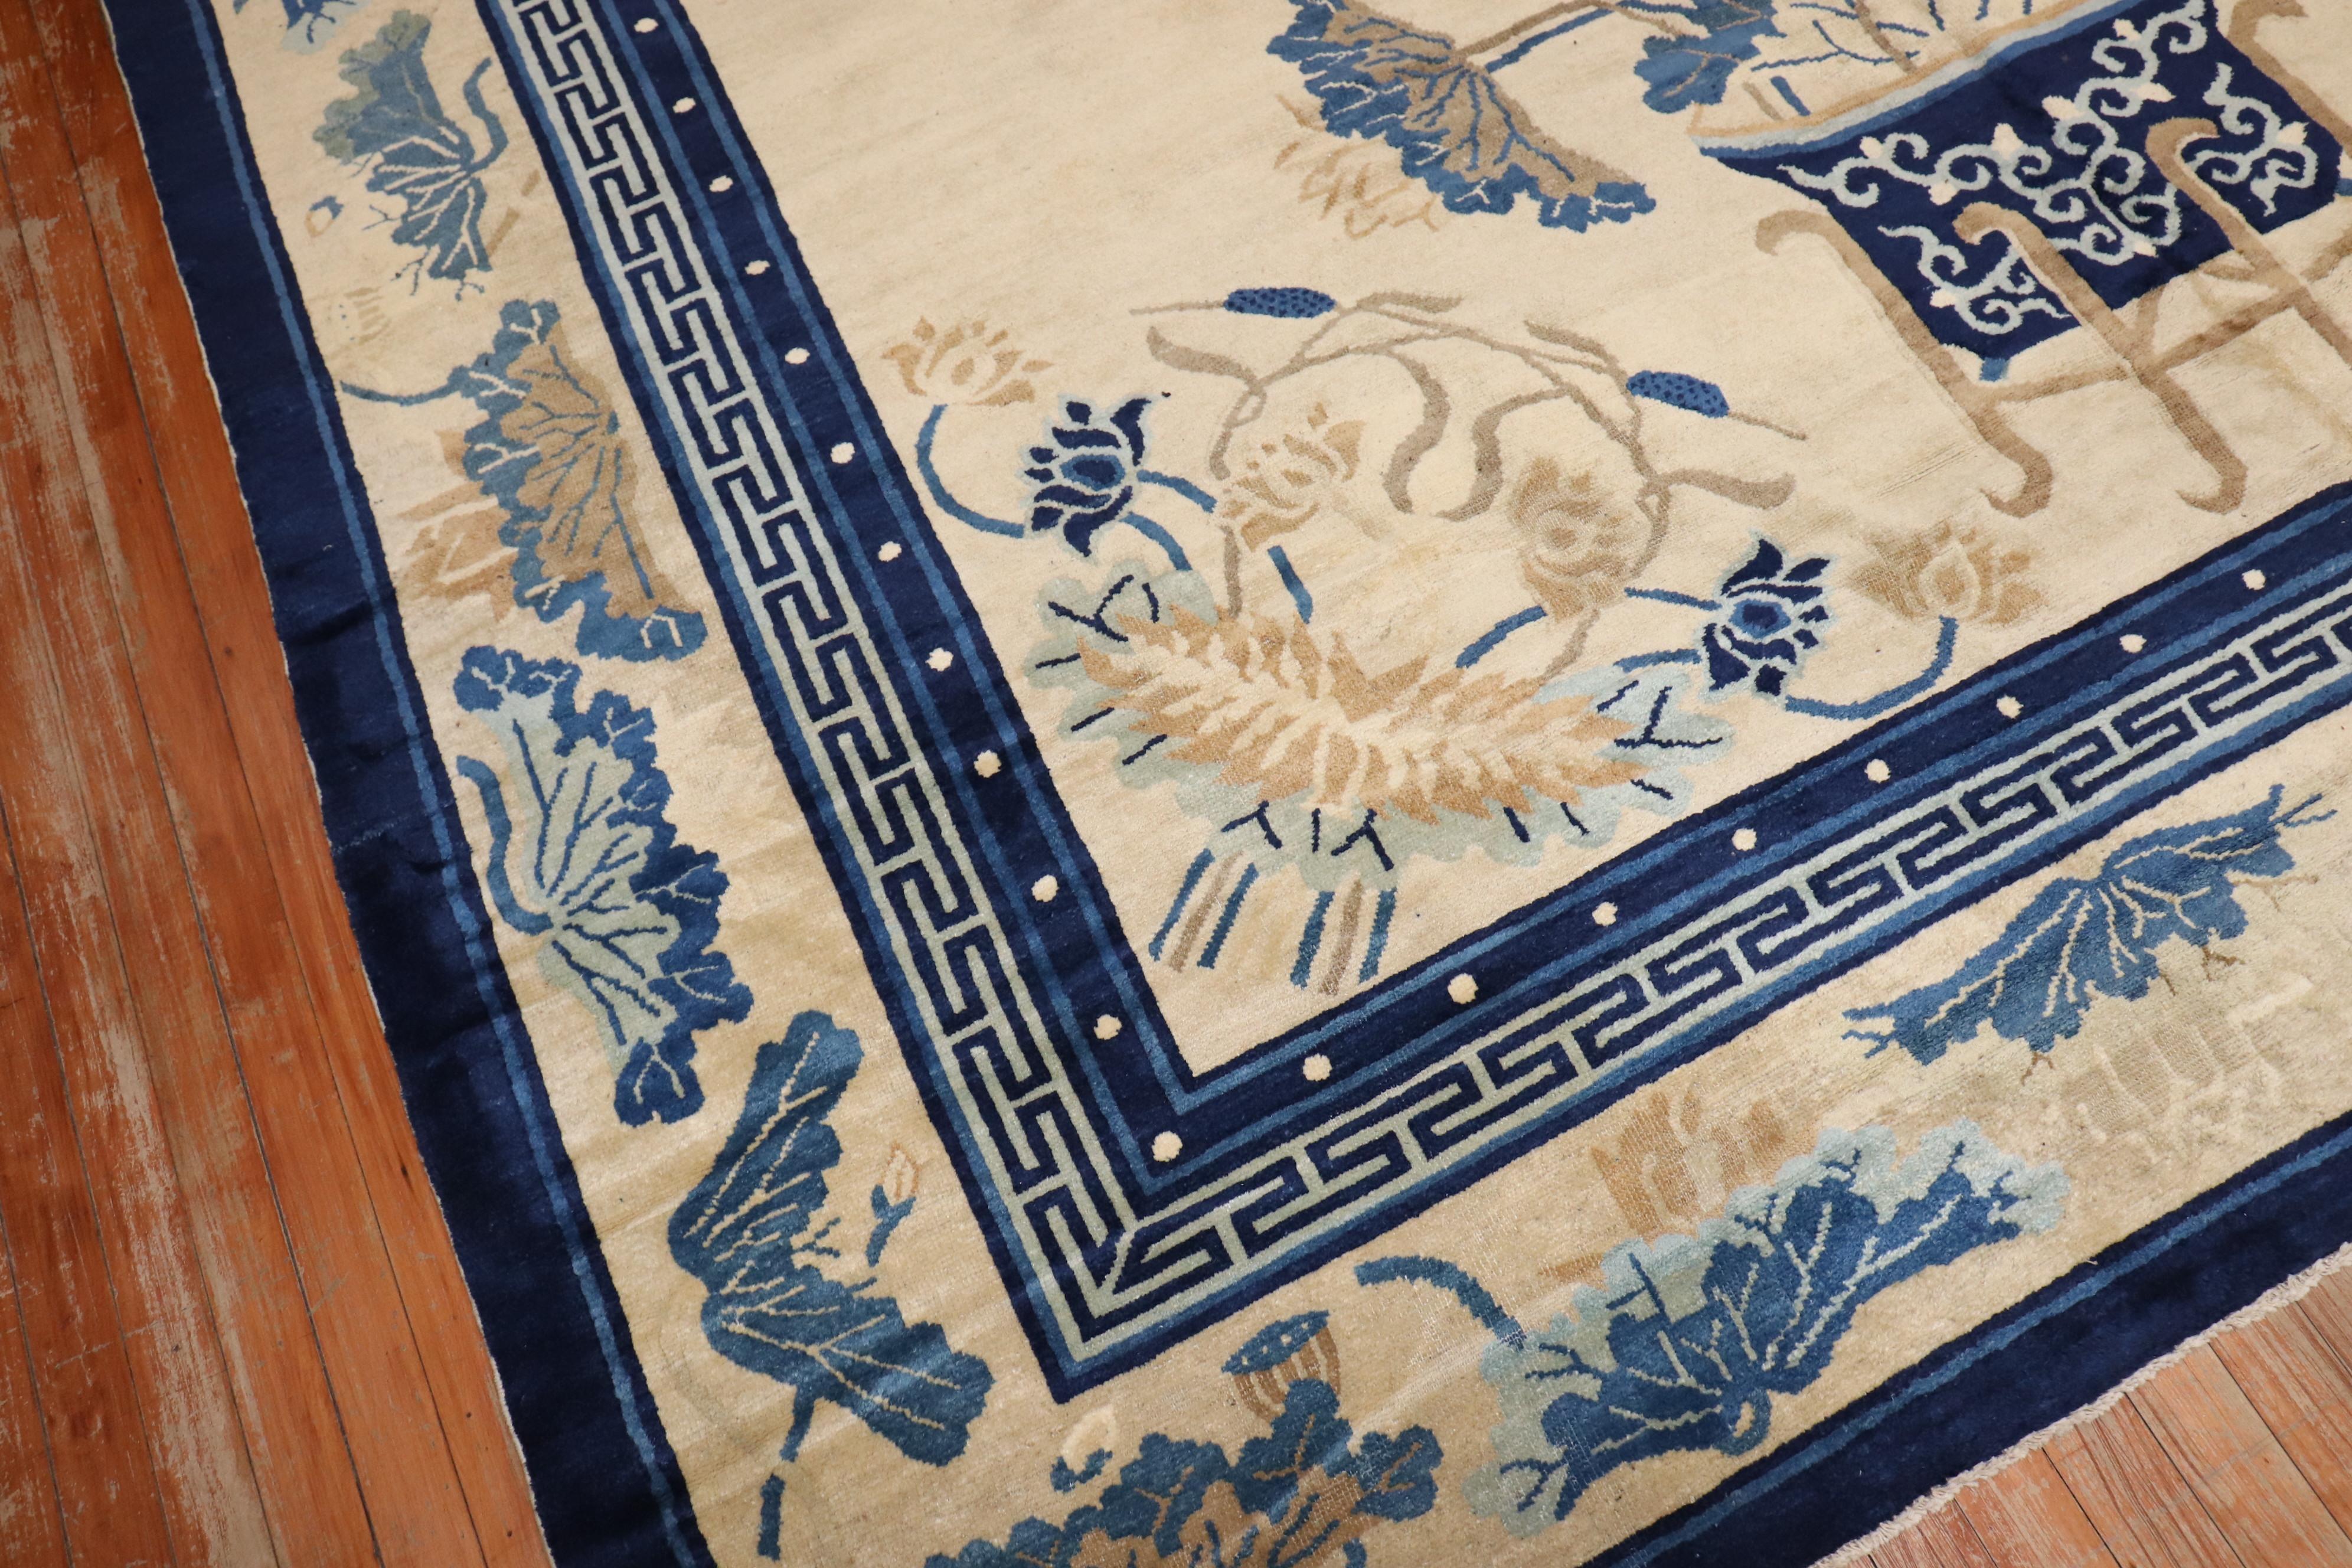 An early 20th century exquisite Chinese Peking rug with an enchanting design and multi-band border in predominant shades of ivory and blue.

8'10'' x 11'7''